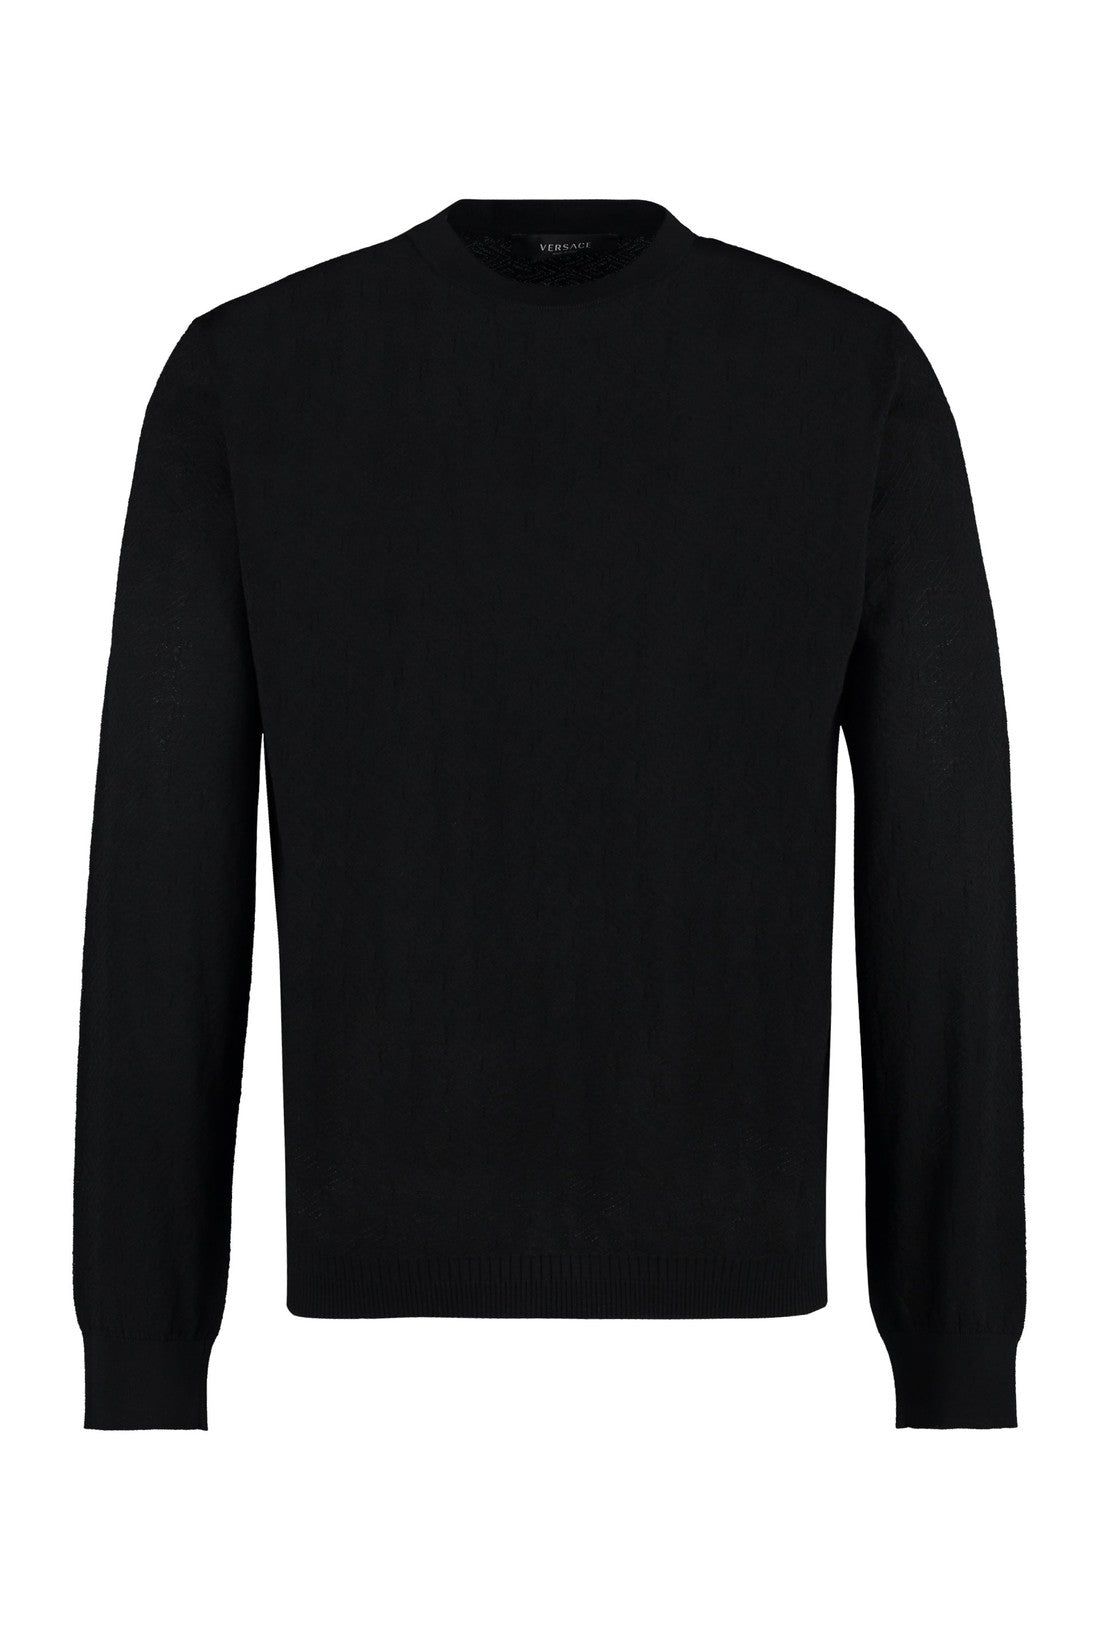 Versace-OUTLET-SALE-Silk and cotton blend sweater-ARCHIVIST